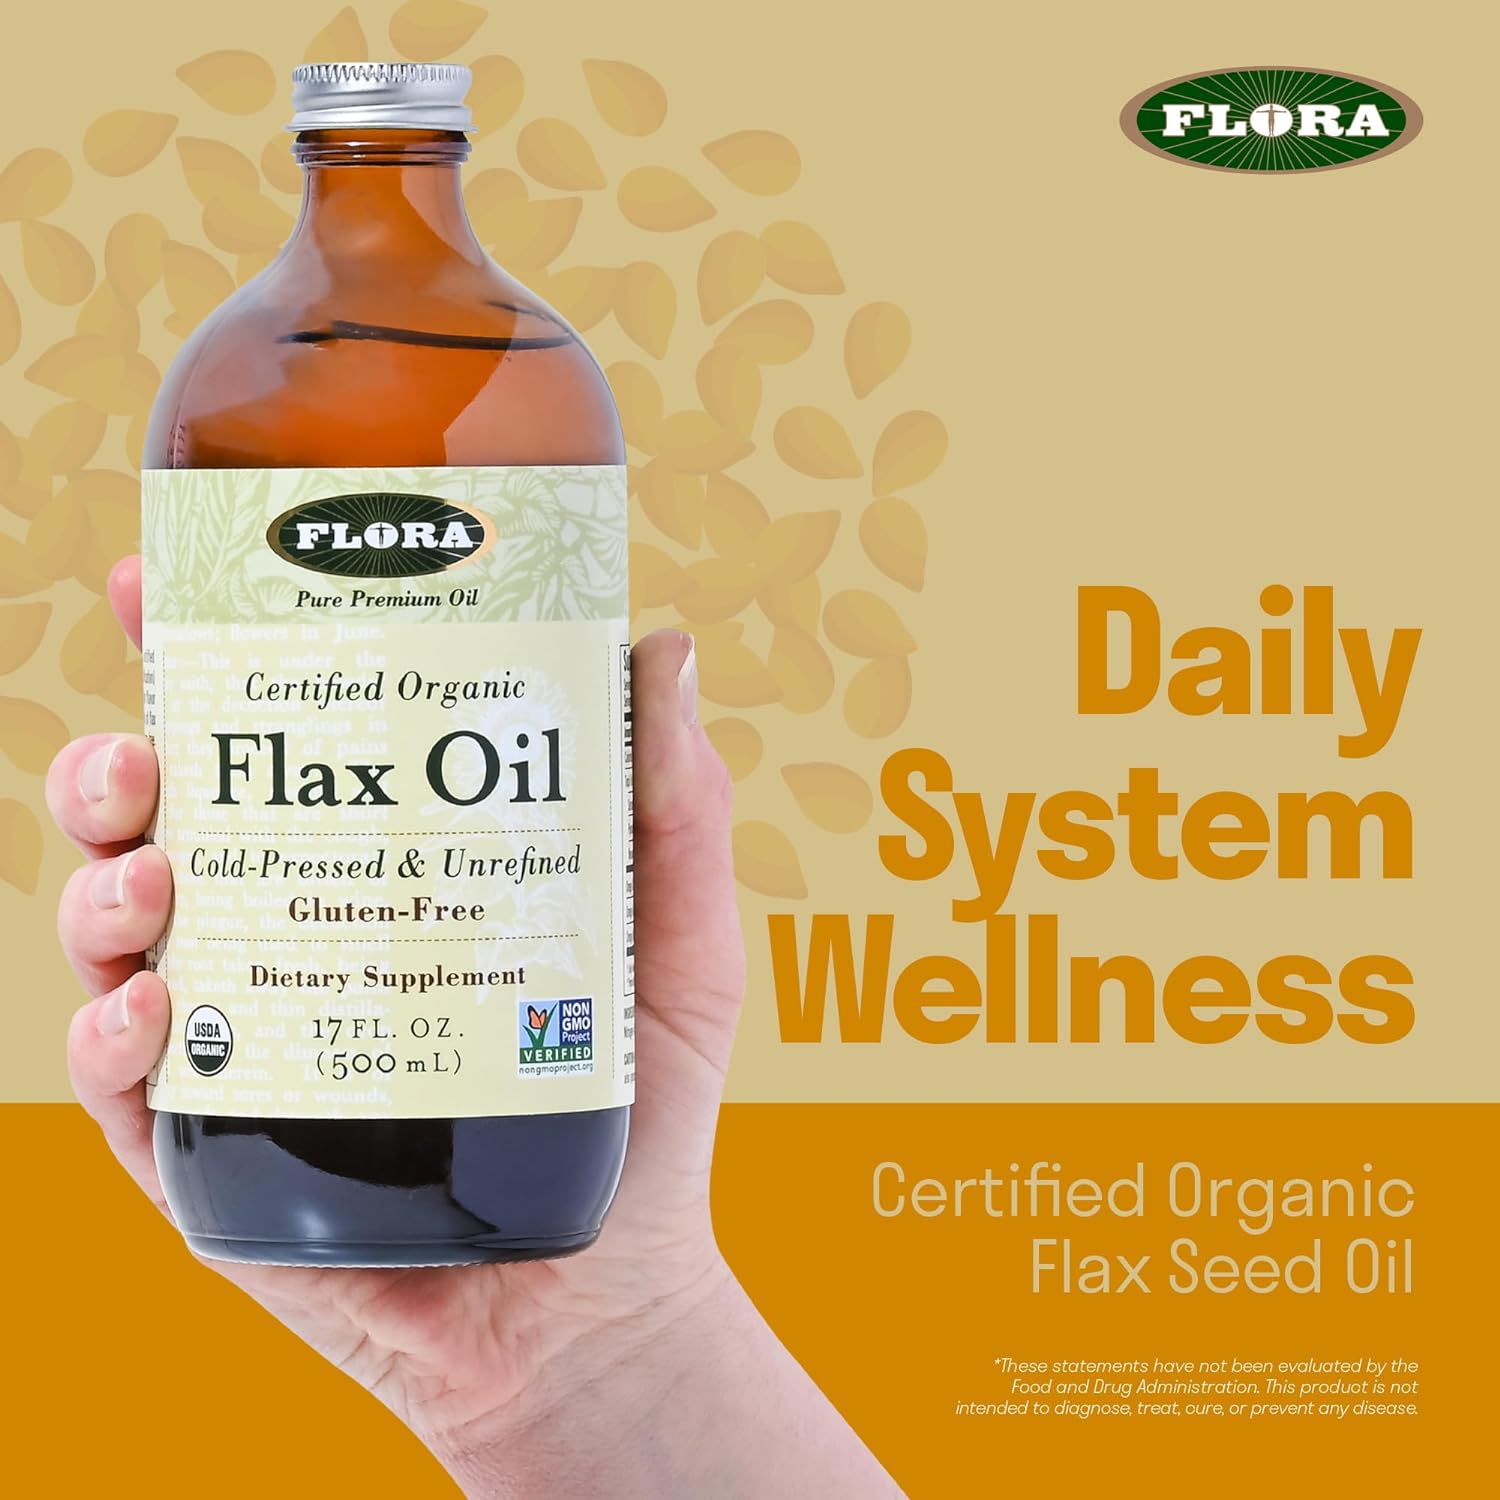 Flora Certified Organic Flax Seed Oil - Cold Pressed & Unrefined - Non-GMO, Gluten-Free, Kosher Omega Flax Oil Blend - Essential Fatty Acids for Wellness - Amber Glass Bottle - 32 oz : Flora Dha Flax Oil : Health & Household